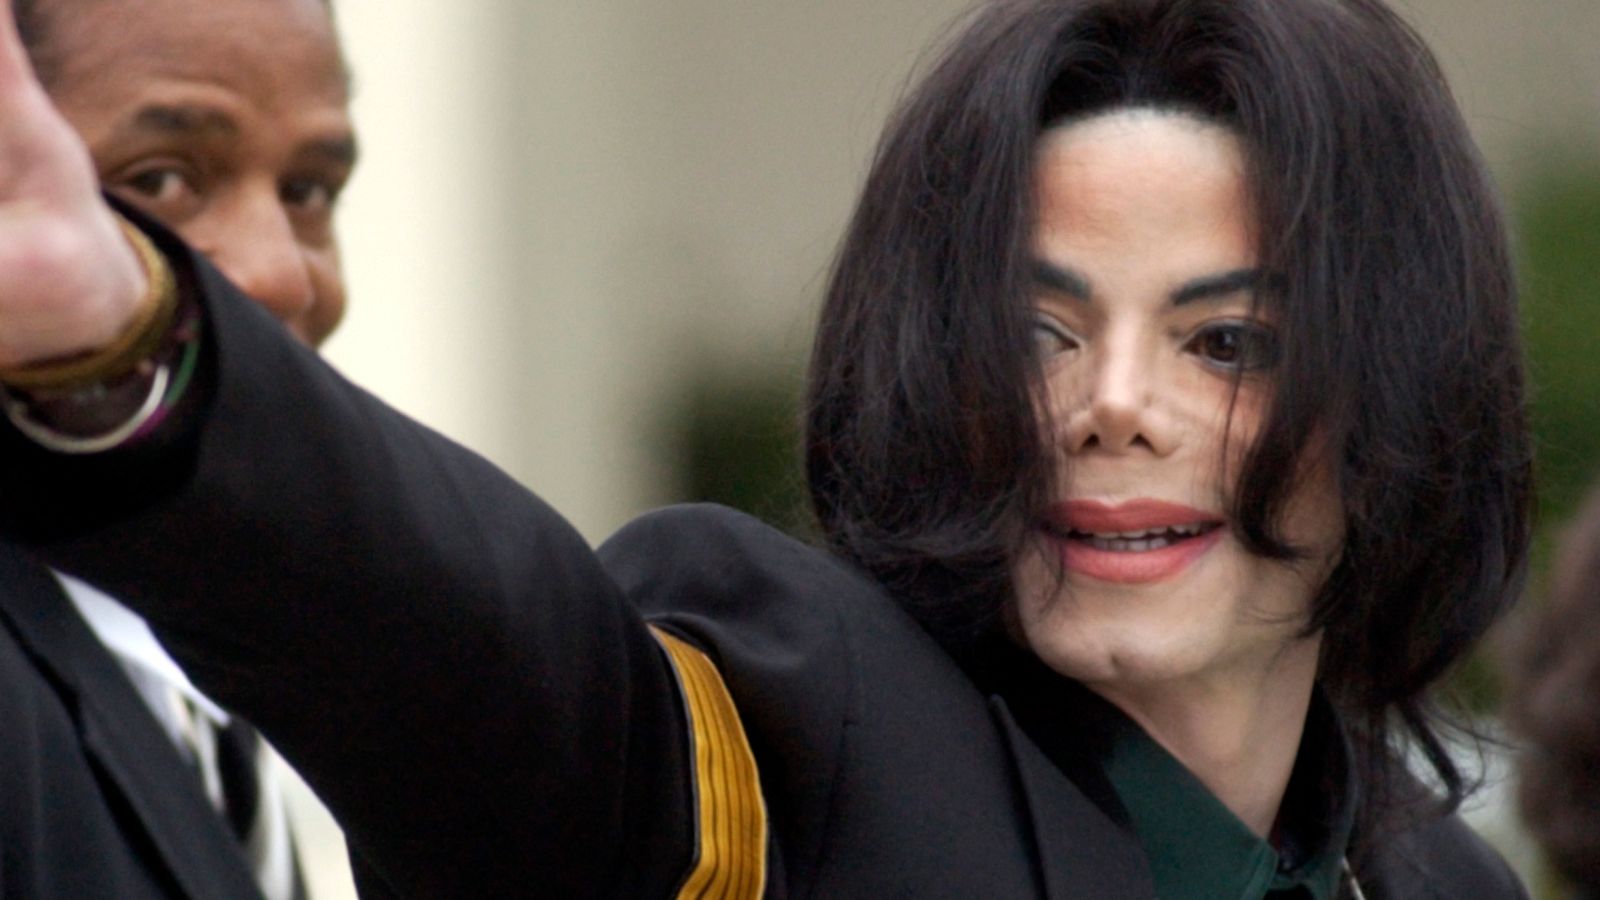 Michael Jackson lawsuits alleging sexual abuse against boys revived by appeals court